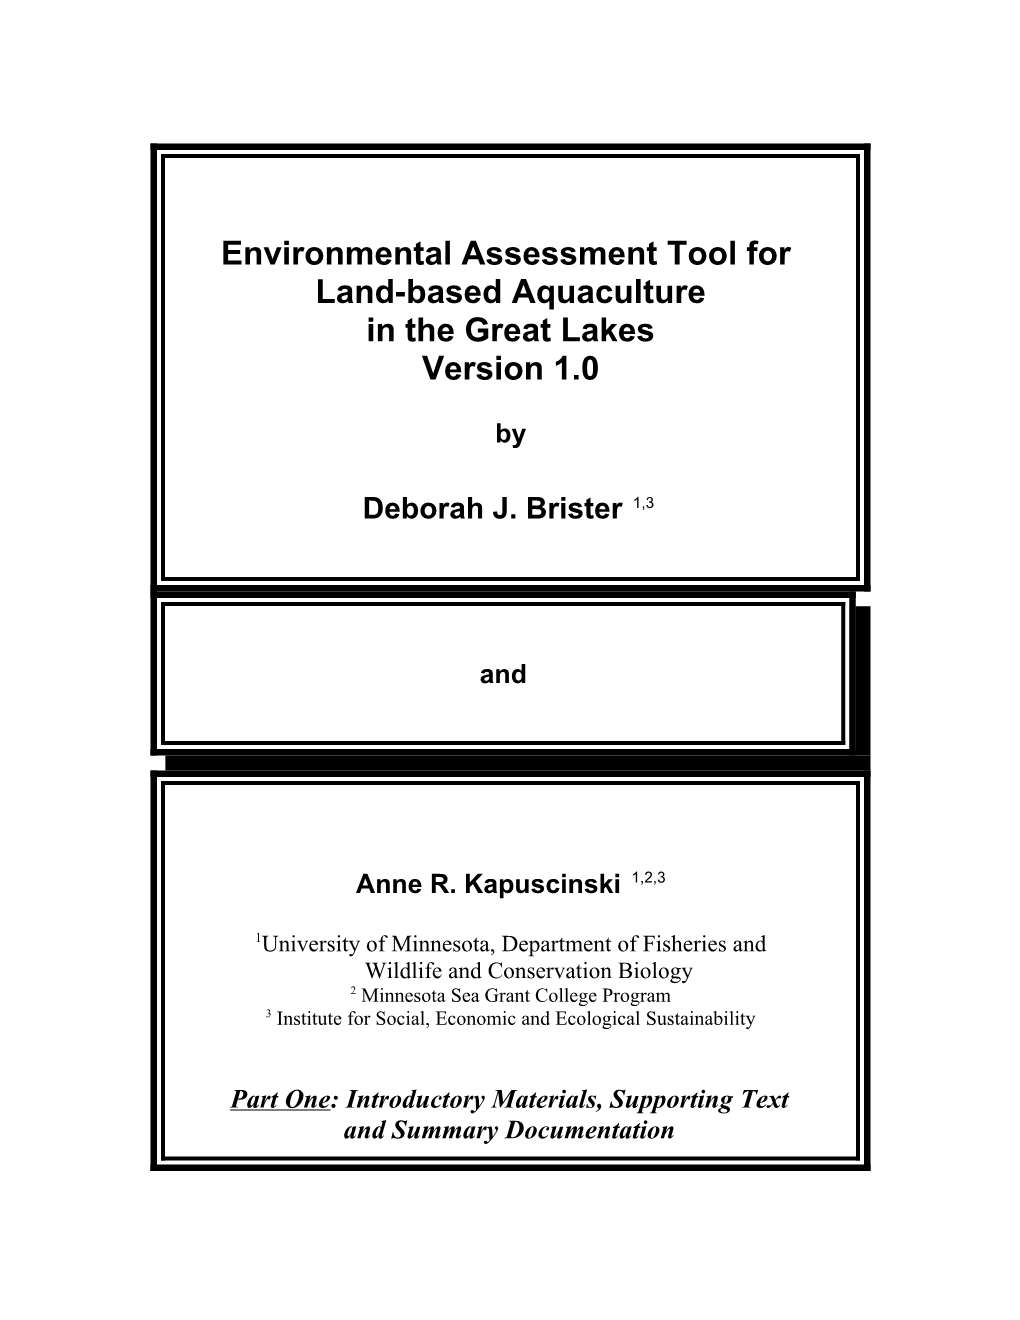 Environmental Assessment Tool for Land-Based Aquaculture in the Great Lakes